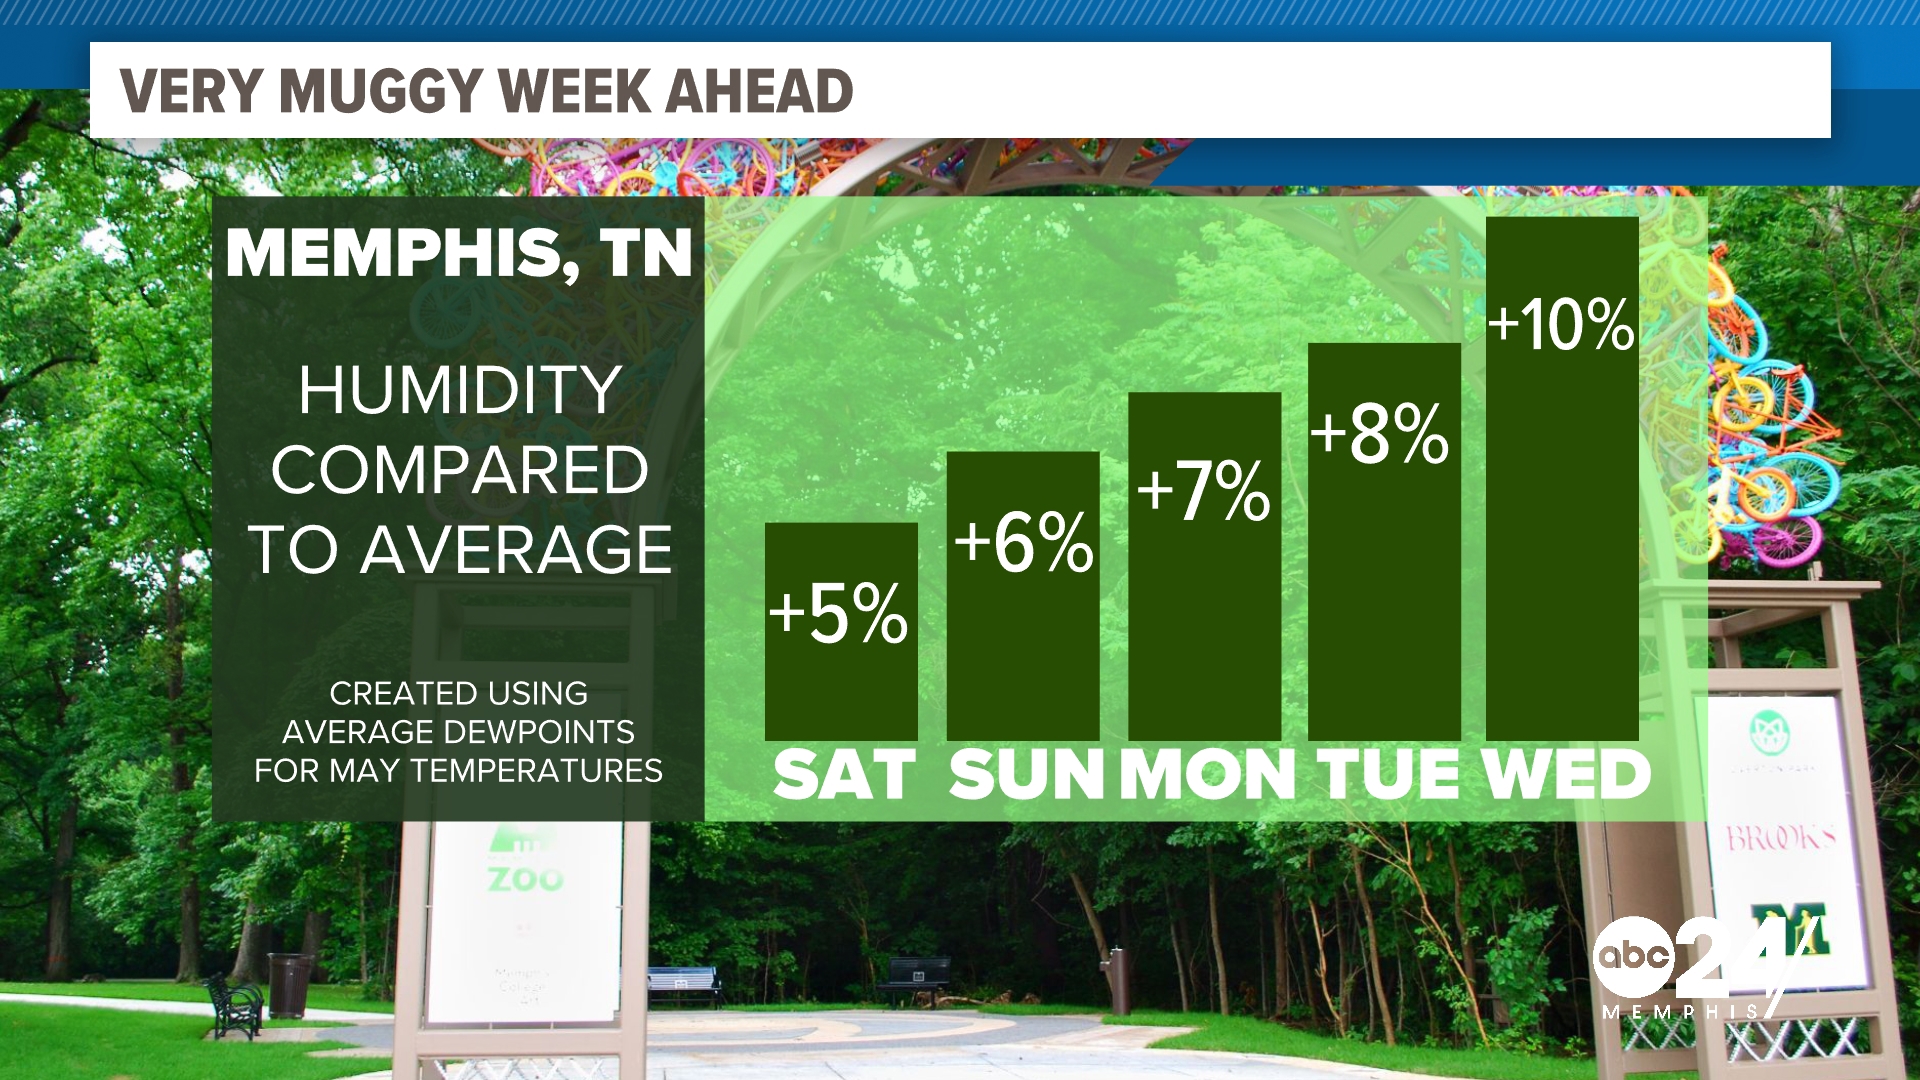 Humidity over the next 5 days will be high leading to rainfall chances. This could be part of a much larger trend when it comes to our weather here in the Mid-South.